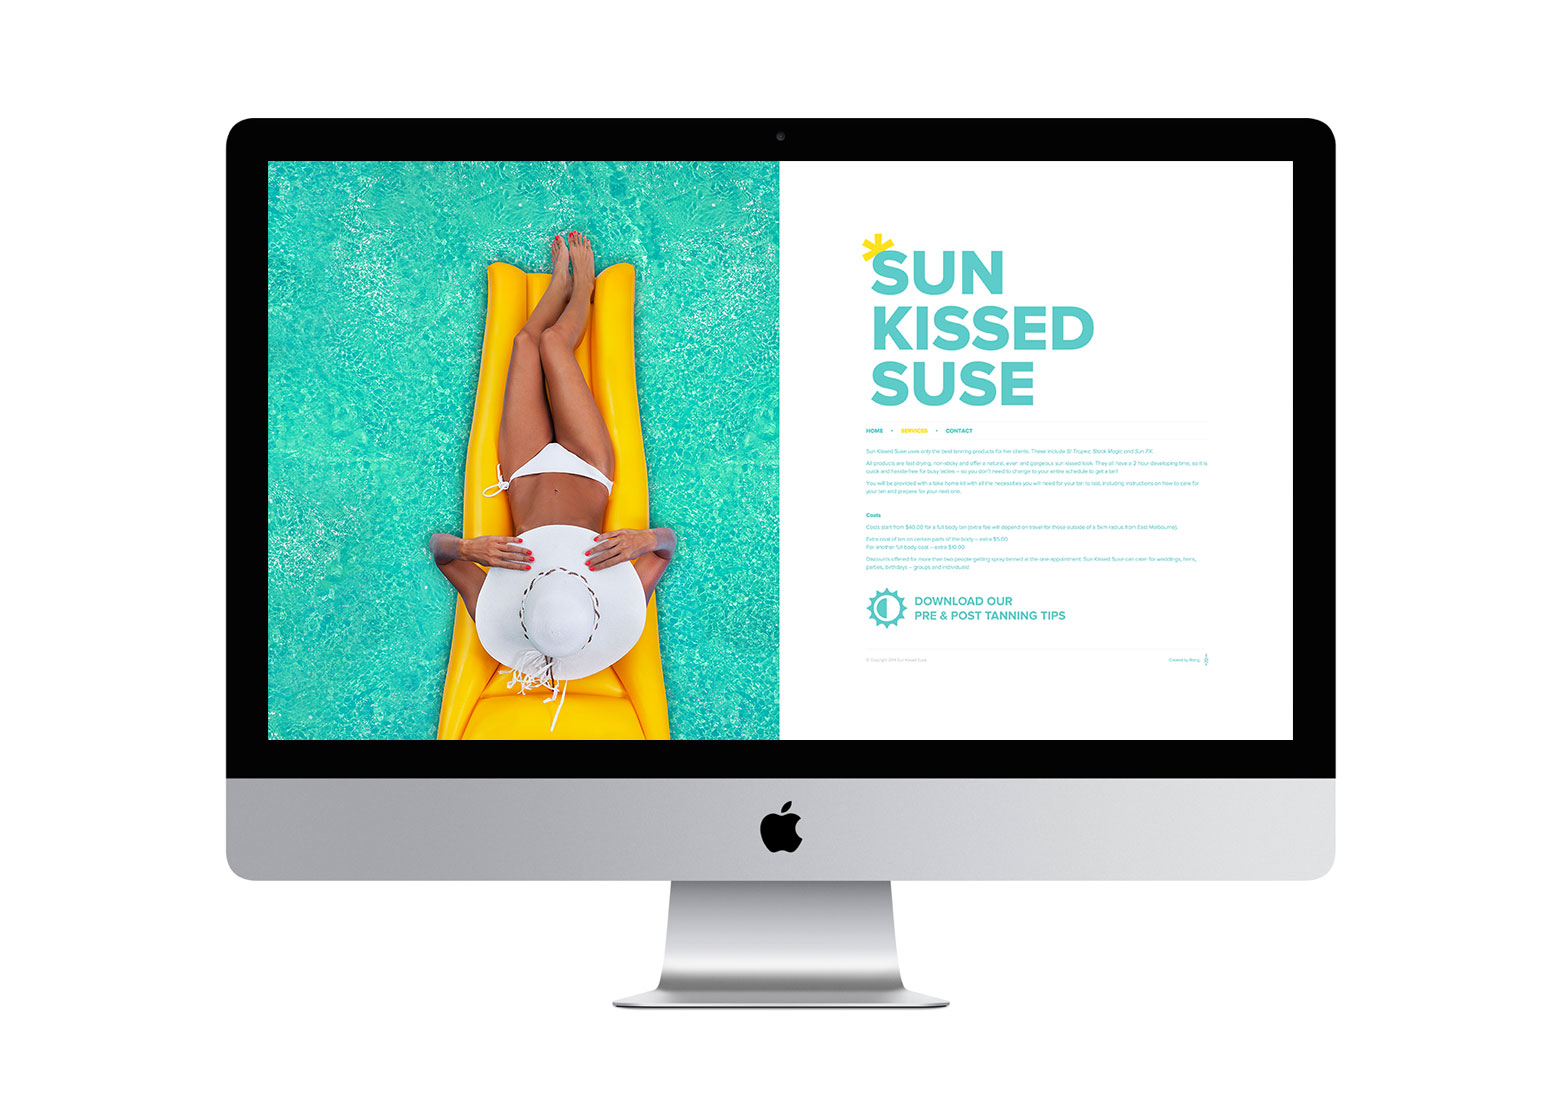 Sun Kissed Suse by Rising Creative